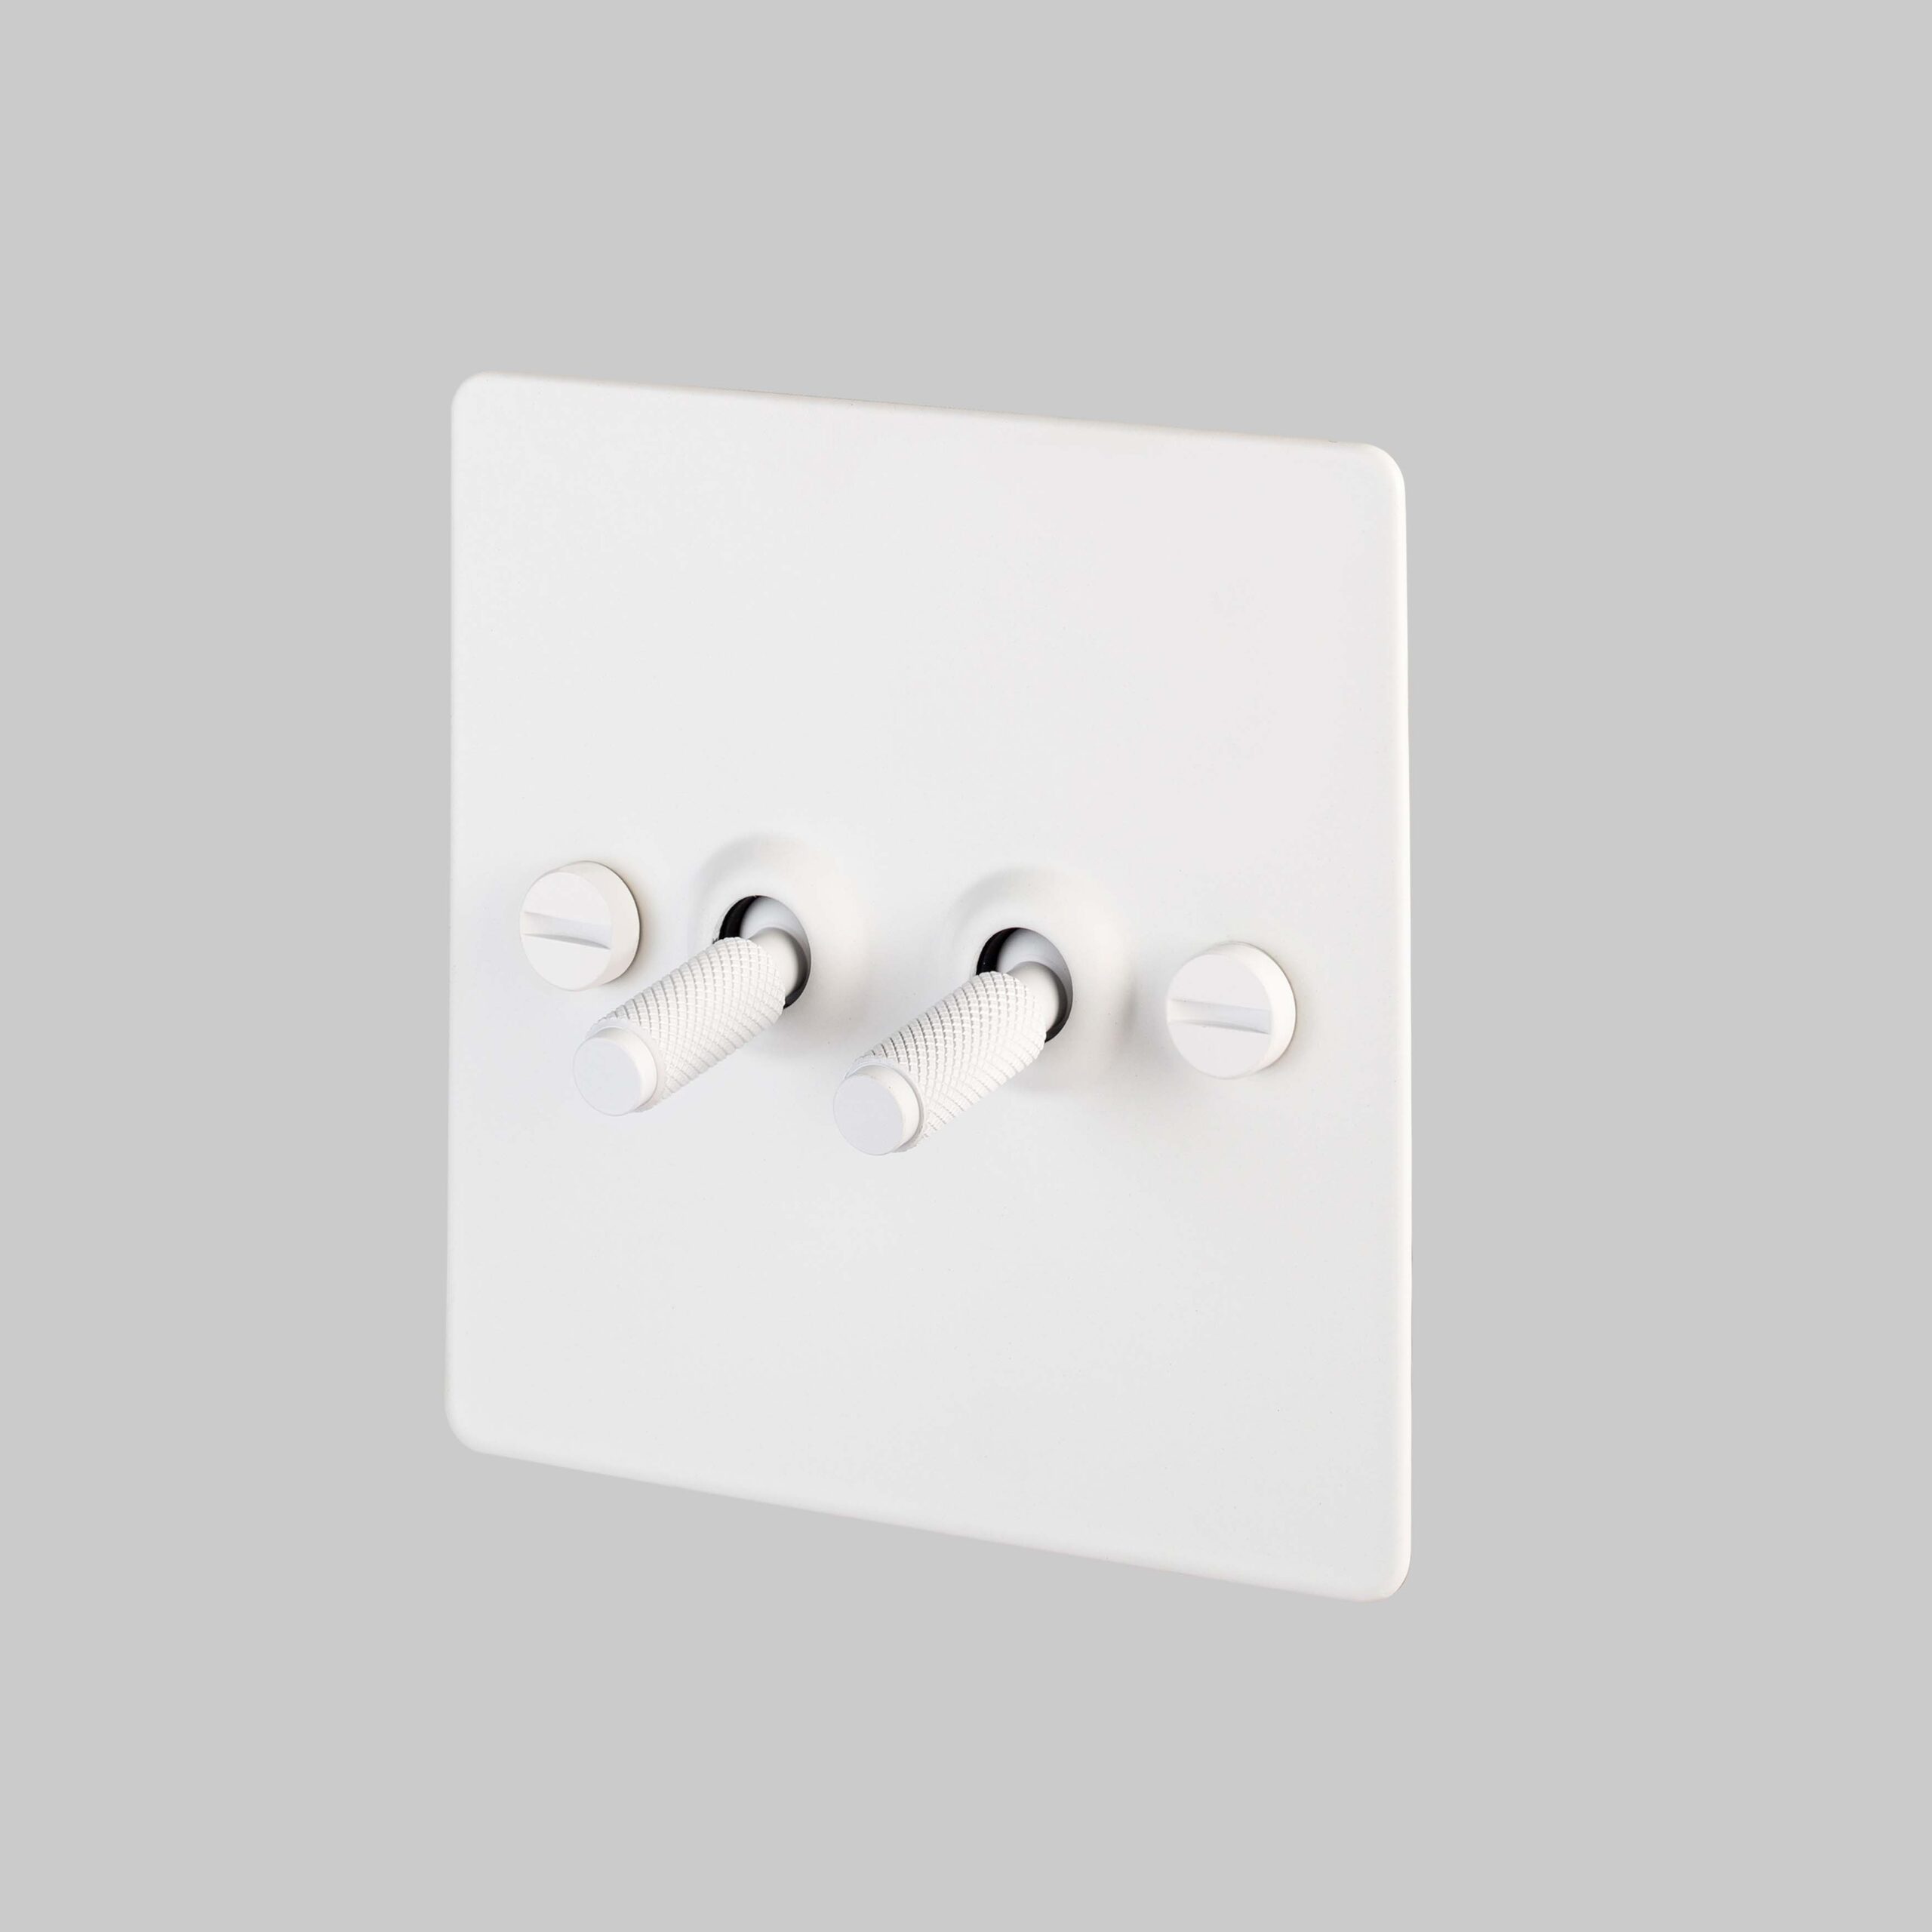 2g-toggle-switch-white-plate